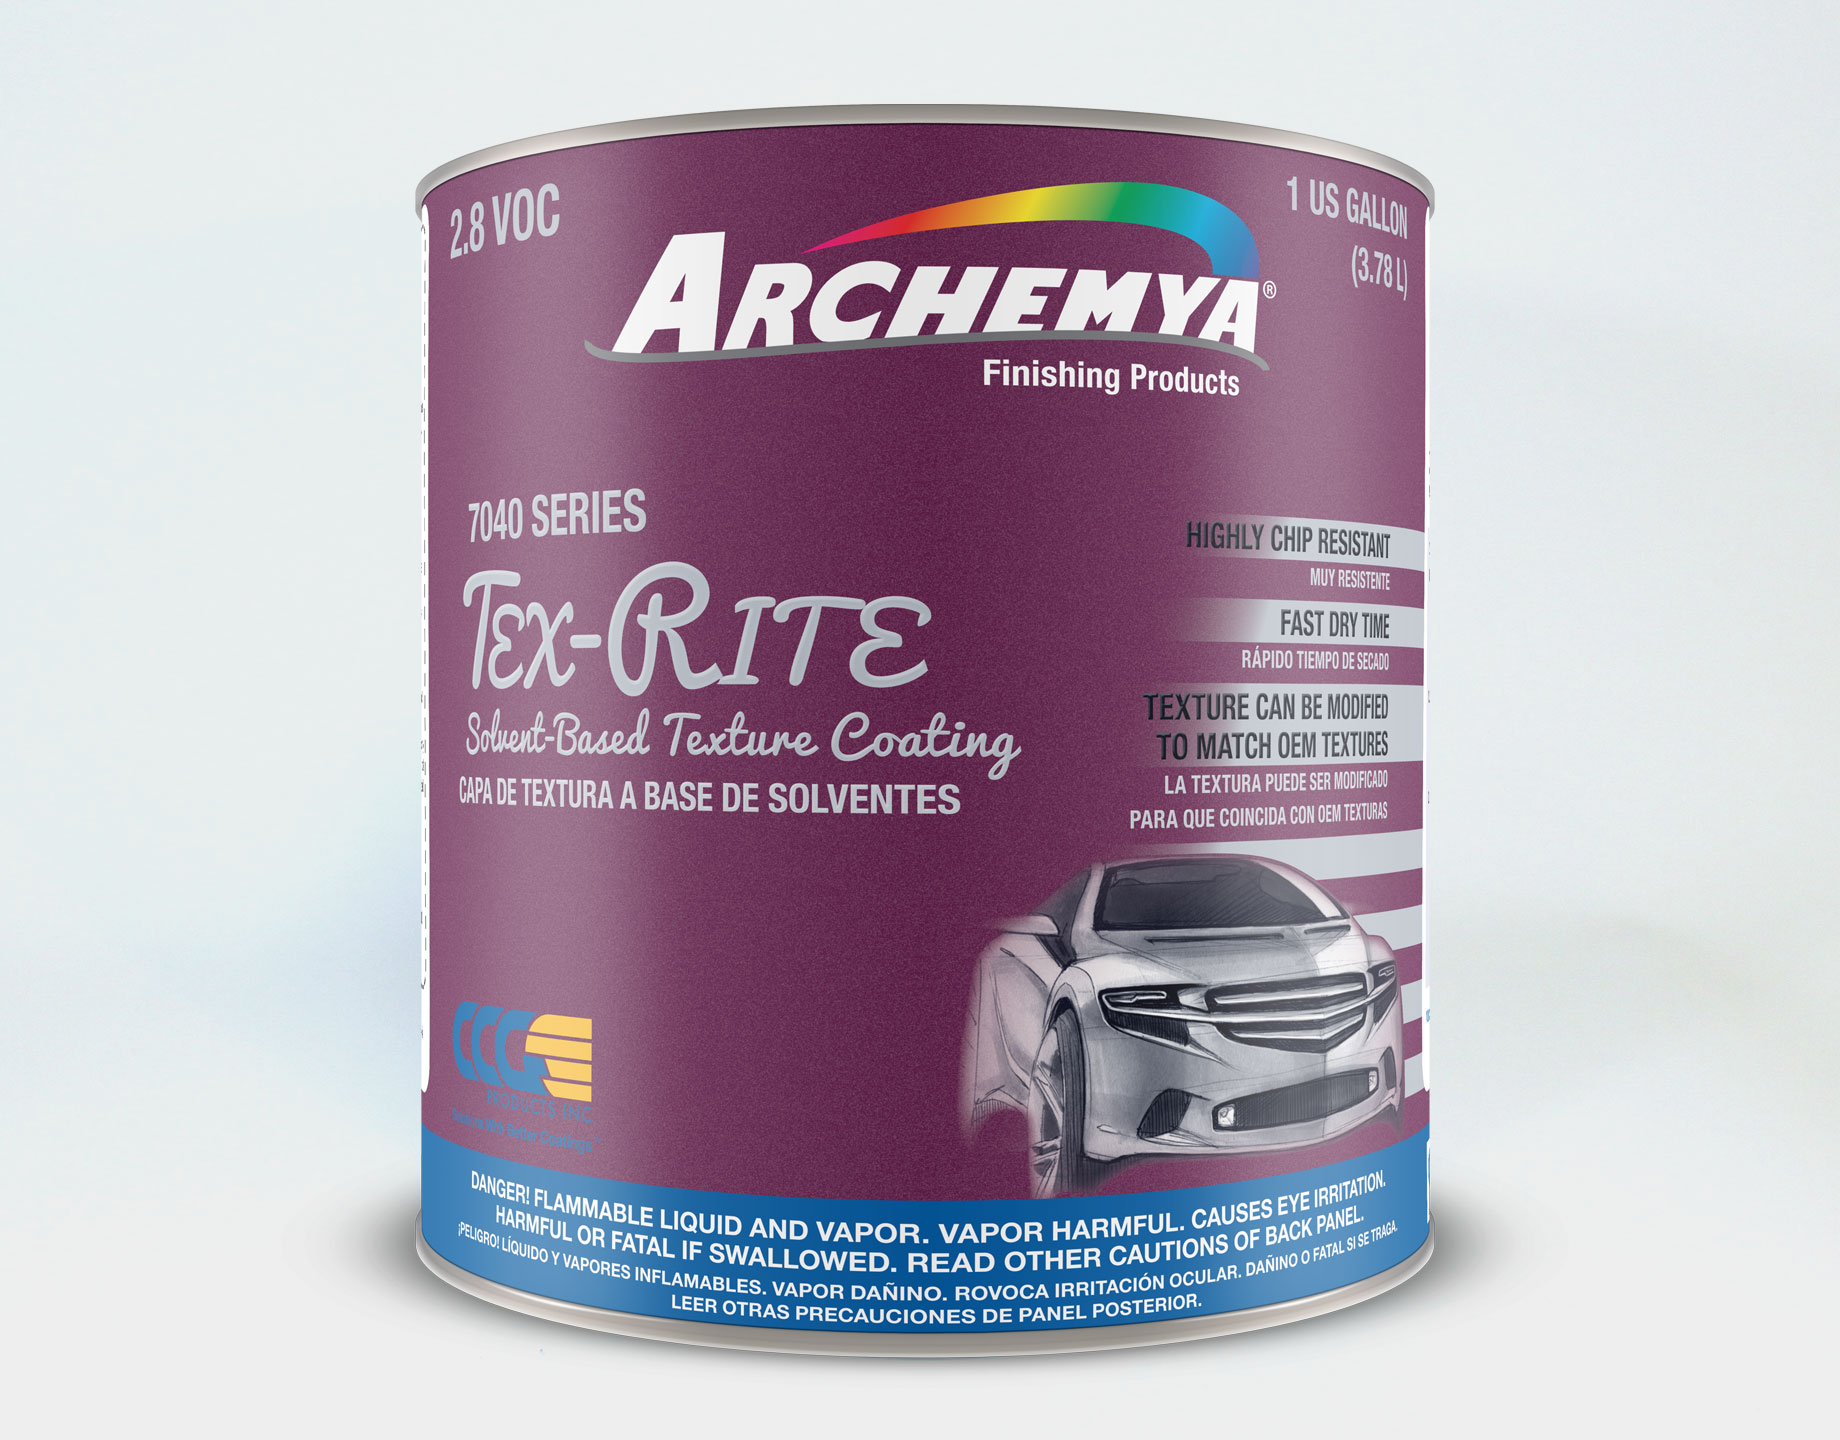 7040 Series Tex-Rite Solvent-Based Texture Coating